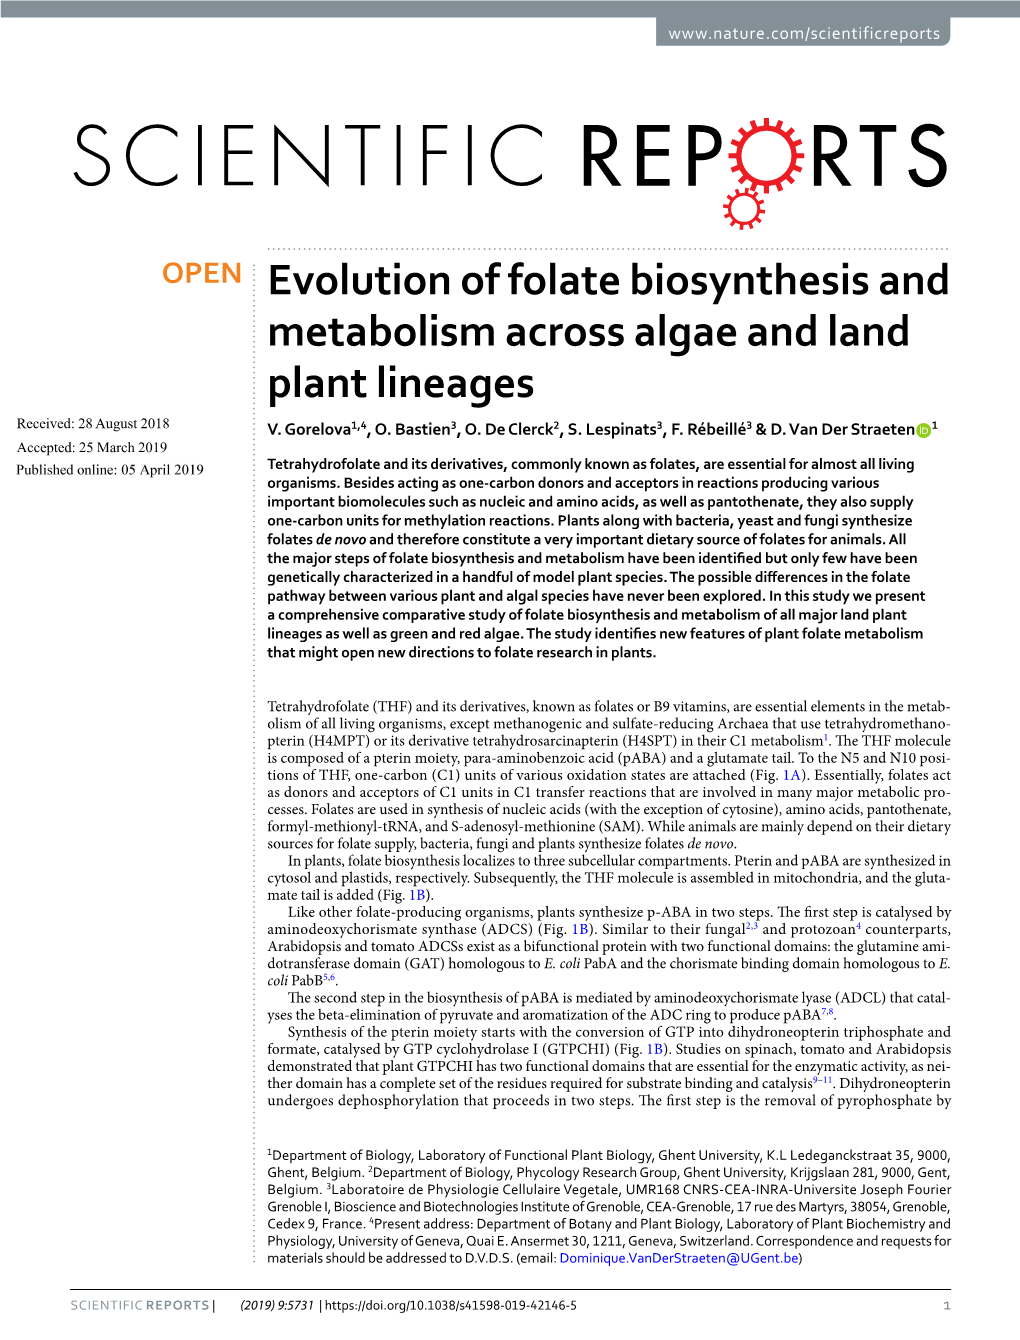 Evolution of Folate Biosynthesis and Metabolism Across Algae and Land Plant Lineages Received: 28 August 2018 V